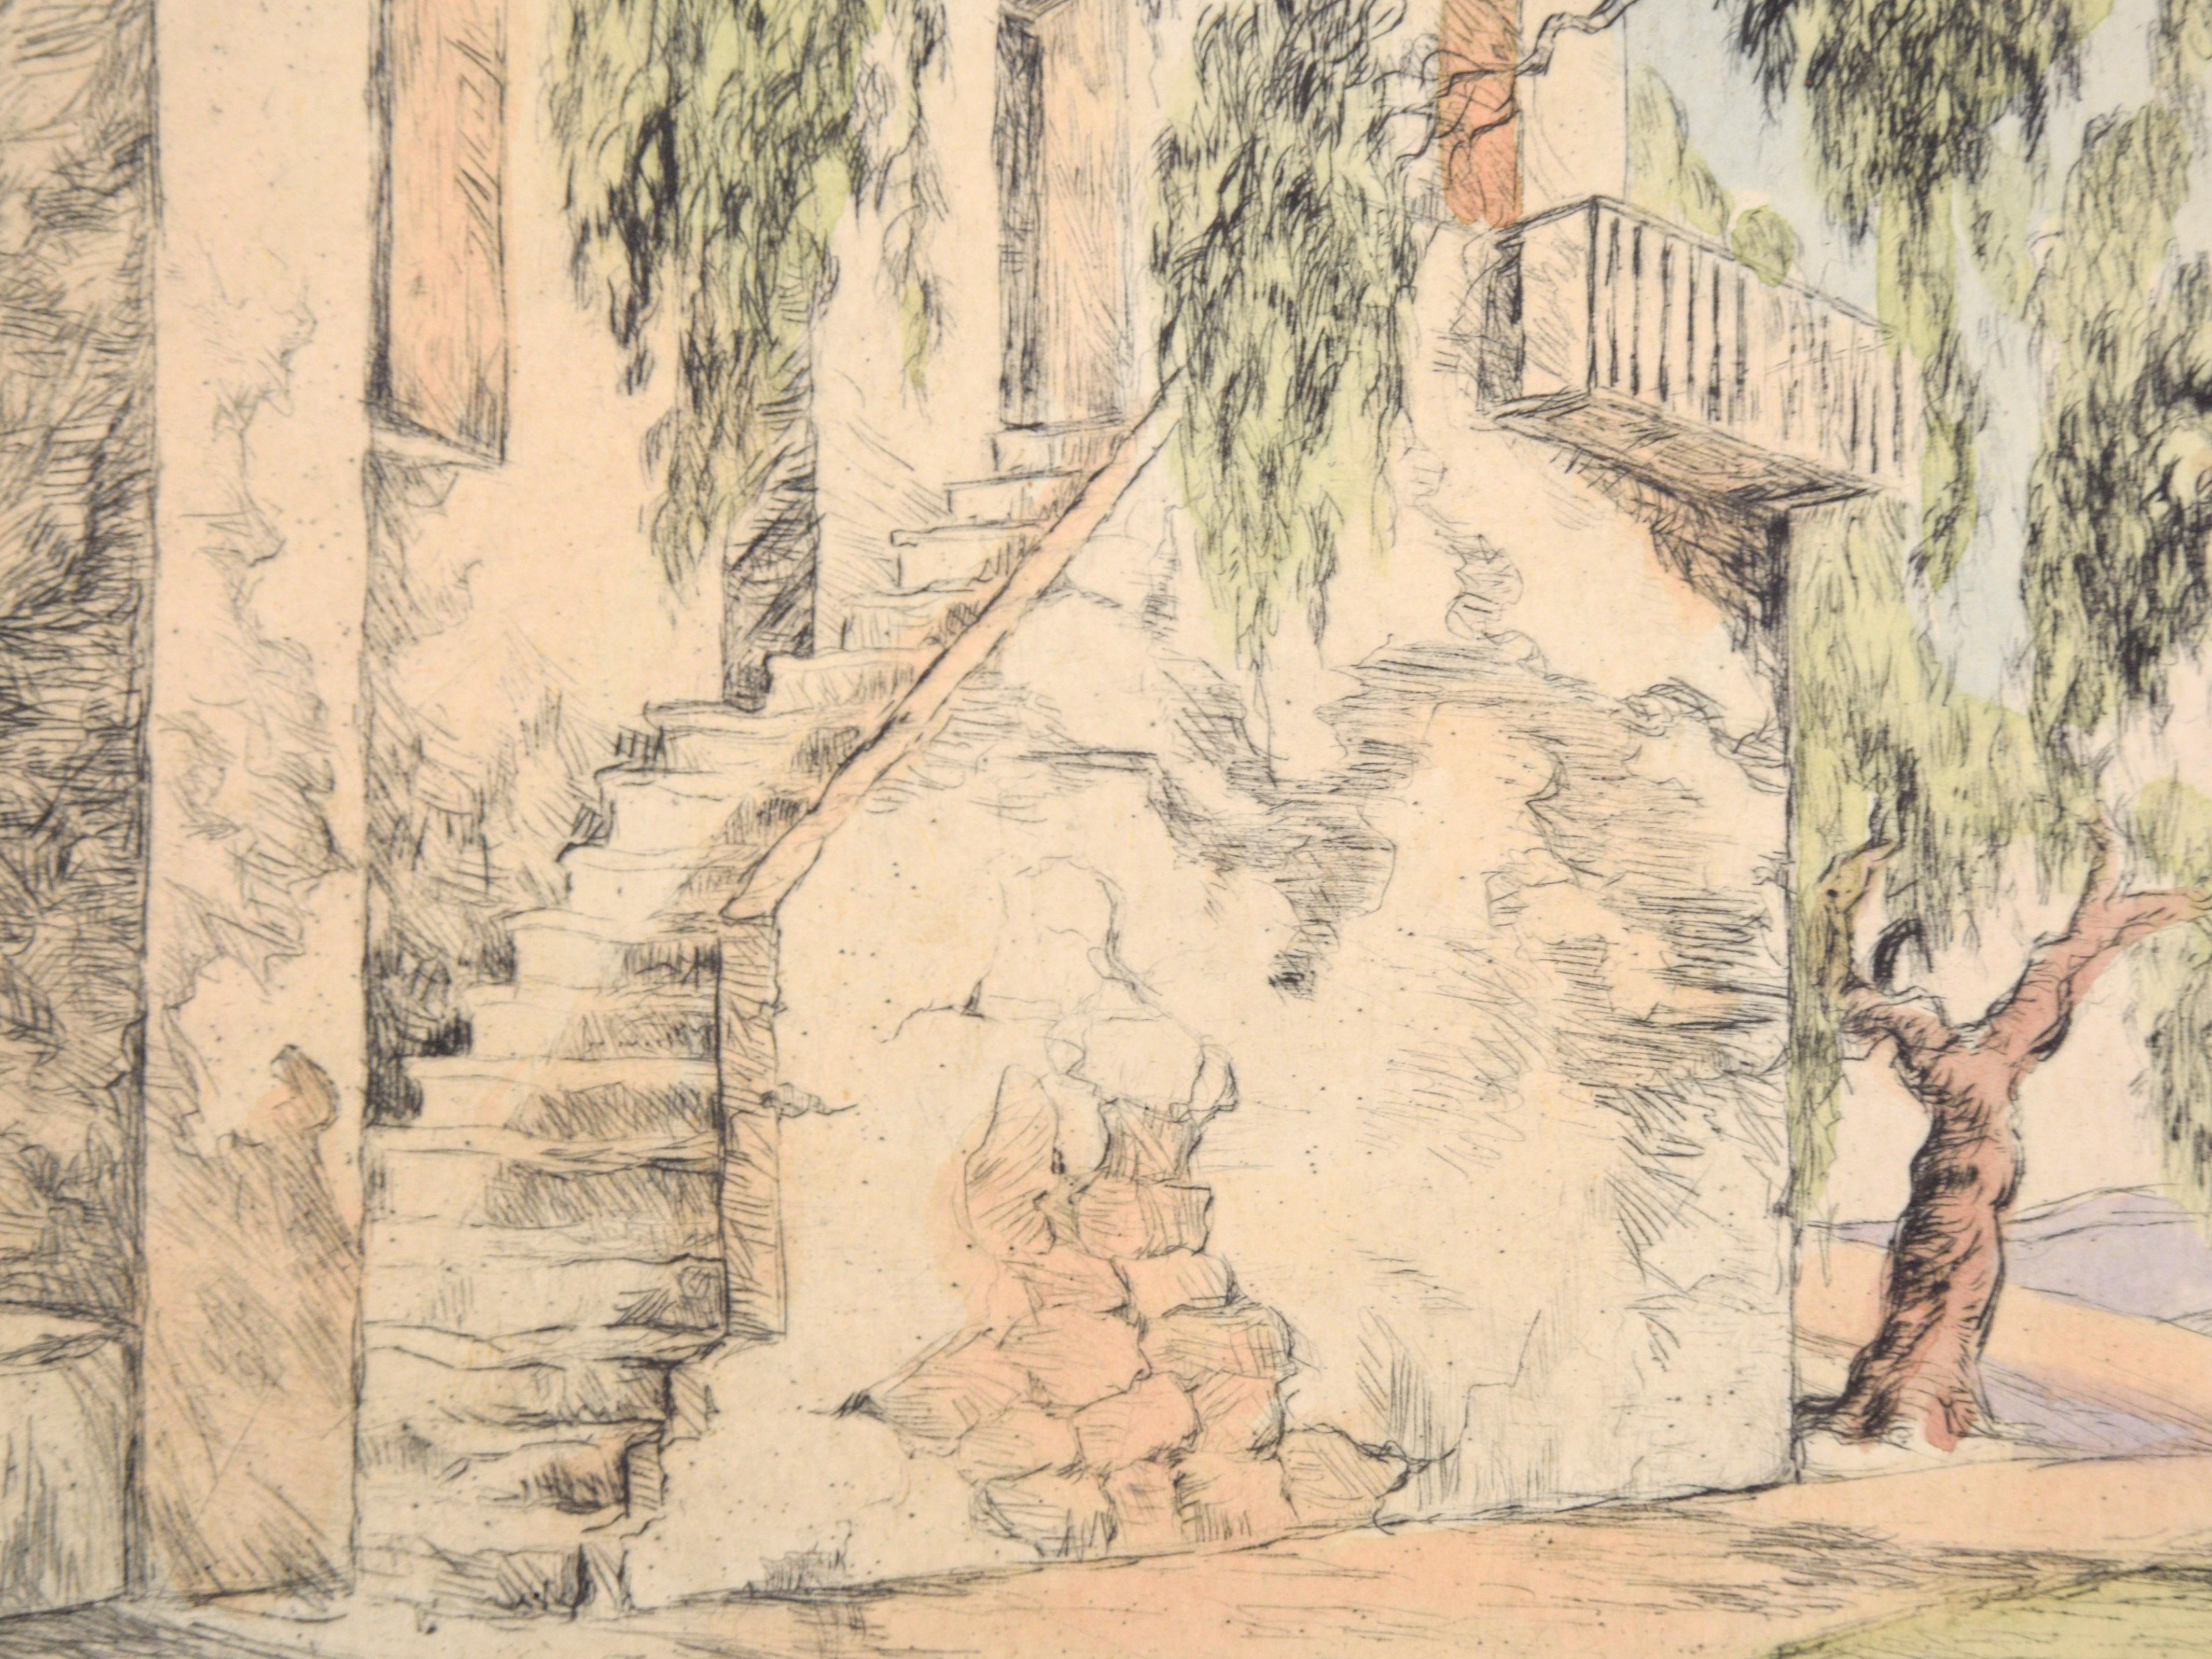 Delicate and detailed etching  by Orpha Klinker (American, 1891-1964). At the edge of an old Adobe building, a staircase leads to the second floor. The stucco on the walls of the building is cracked, revealing the stonework below. Next to the